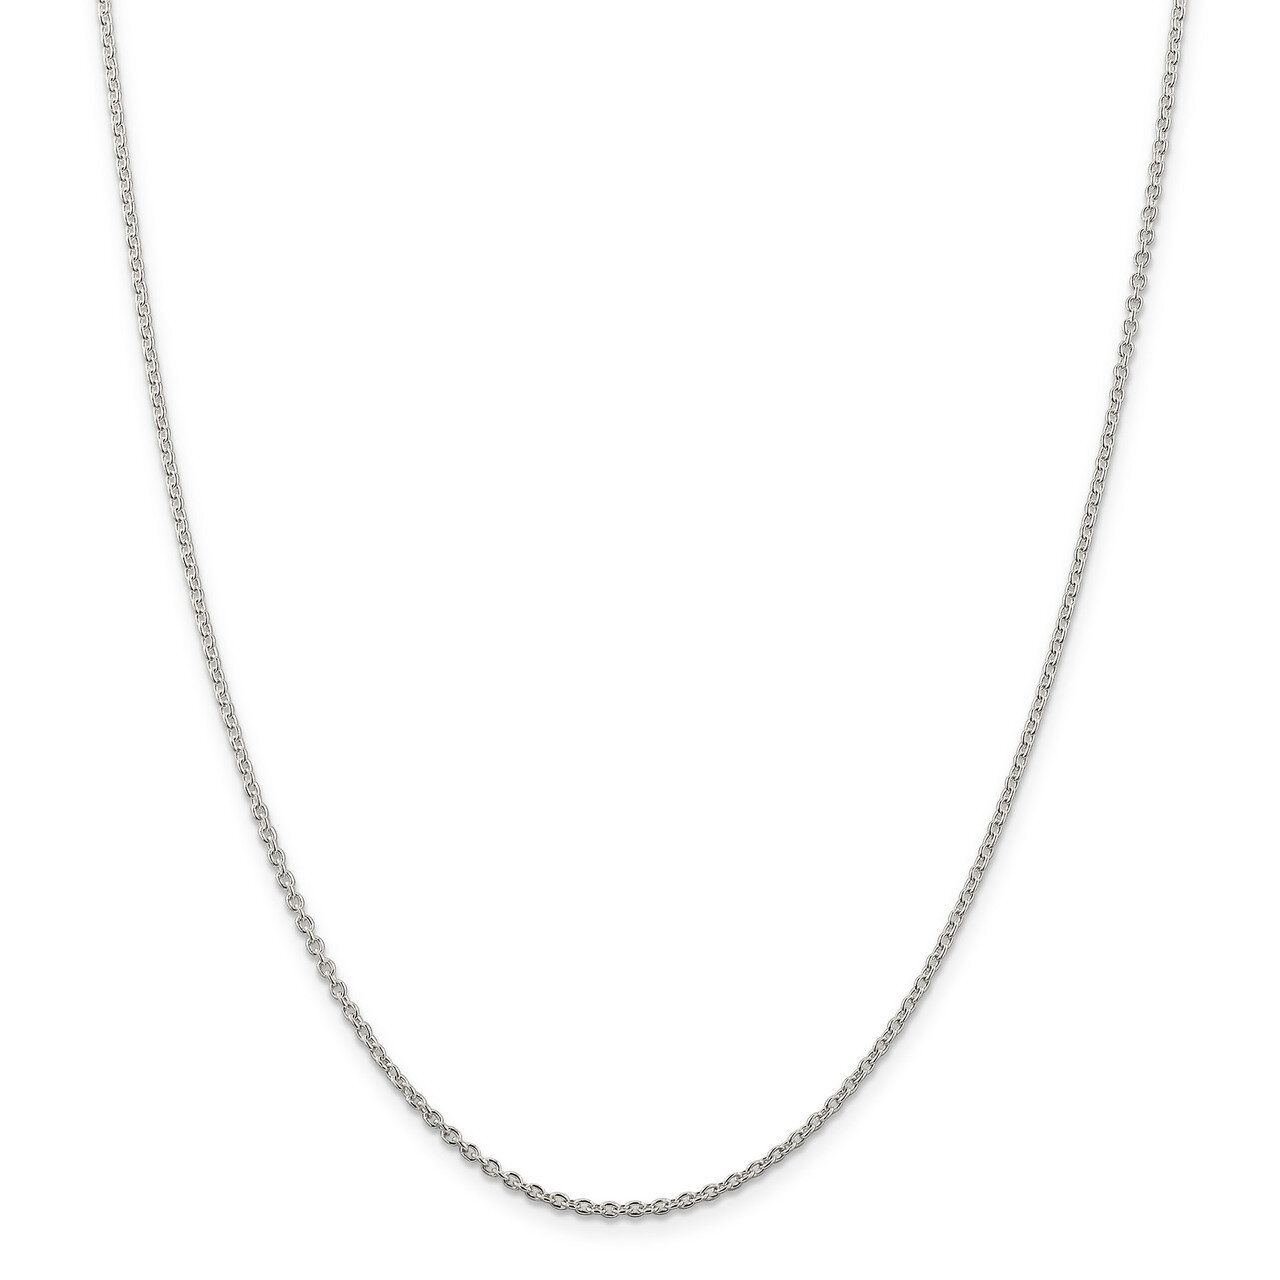 20 Inch 1.95mm Cable Chain Sterling Silver Rhodium-plated QCL050R-20